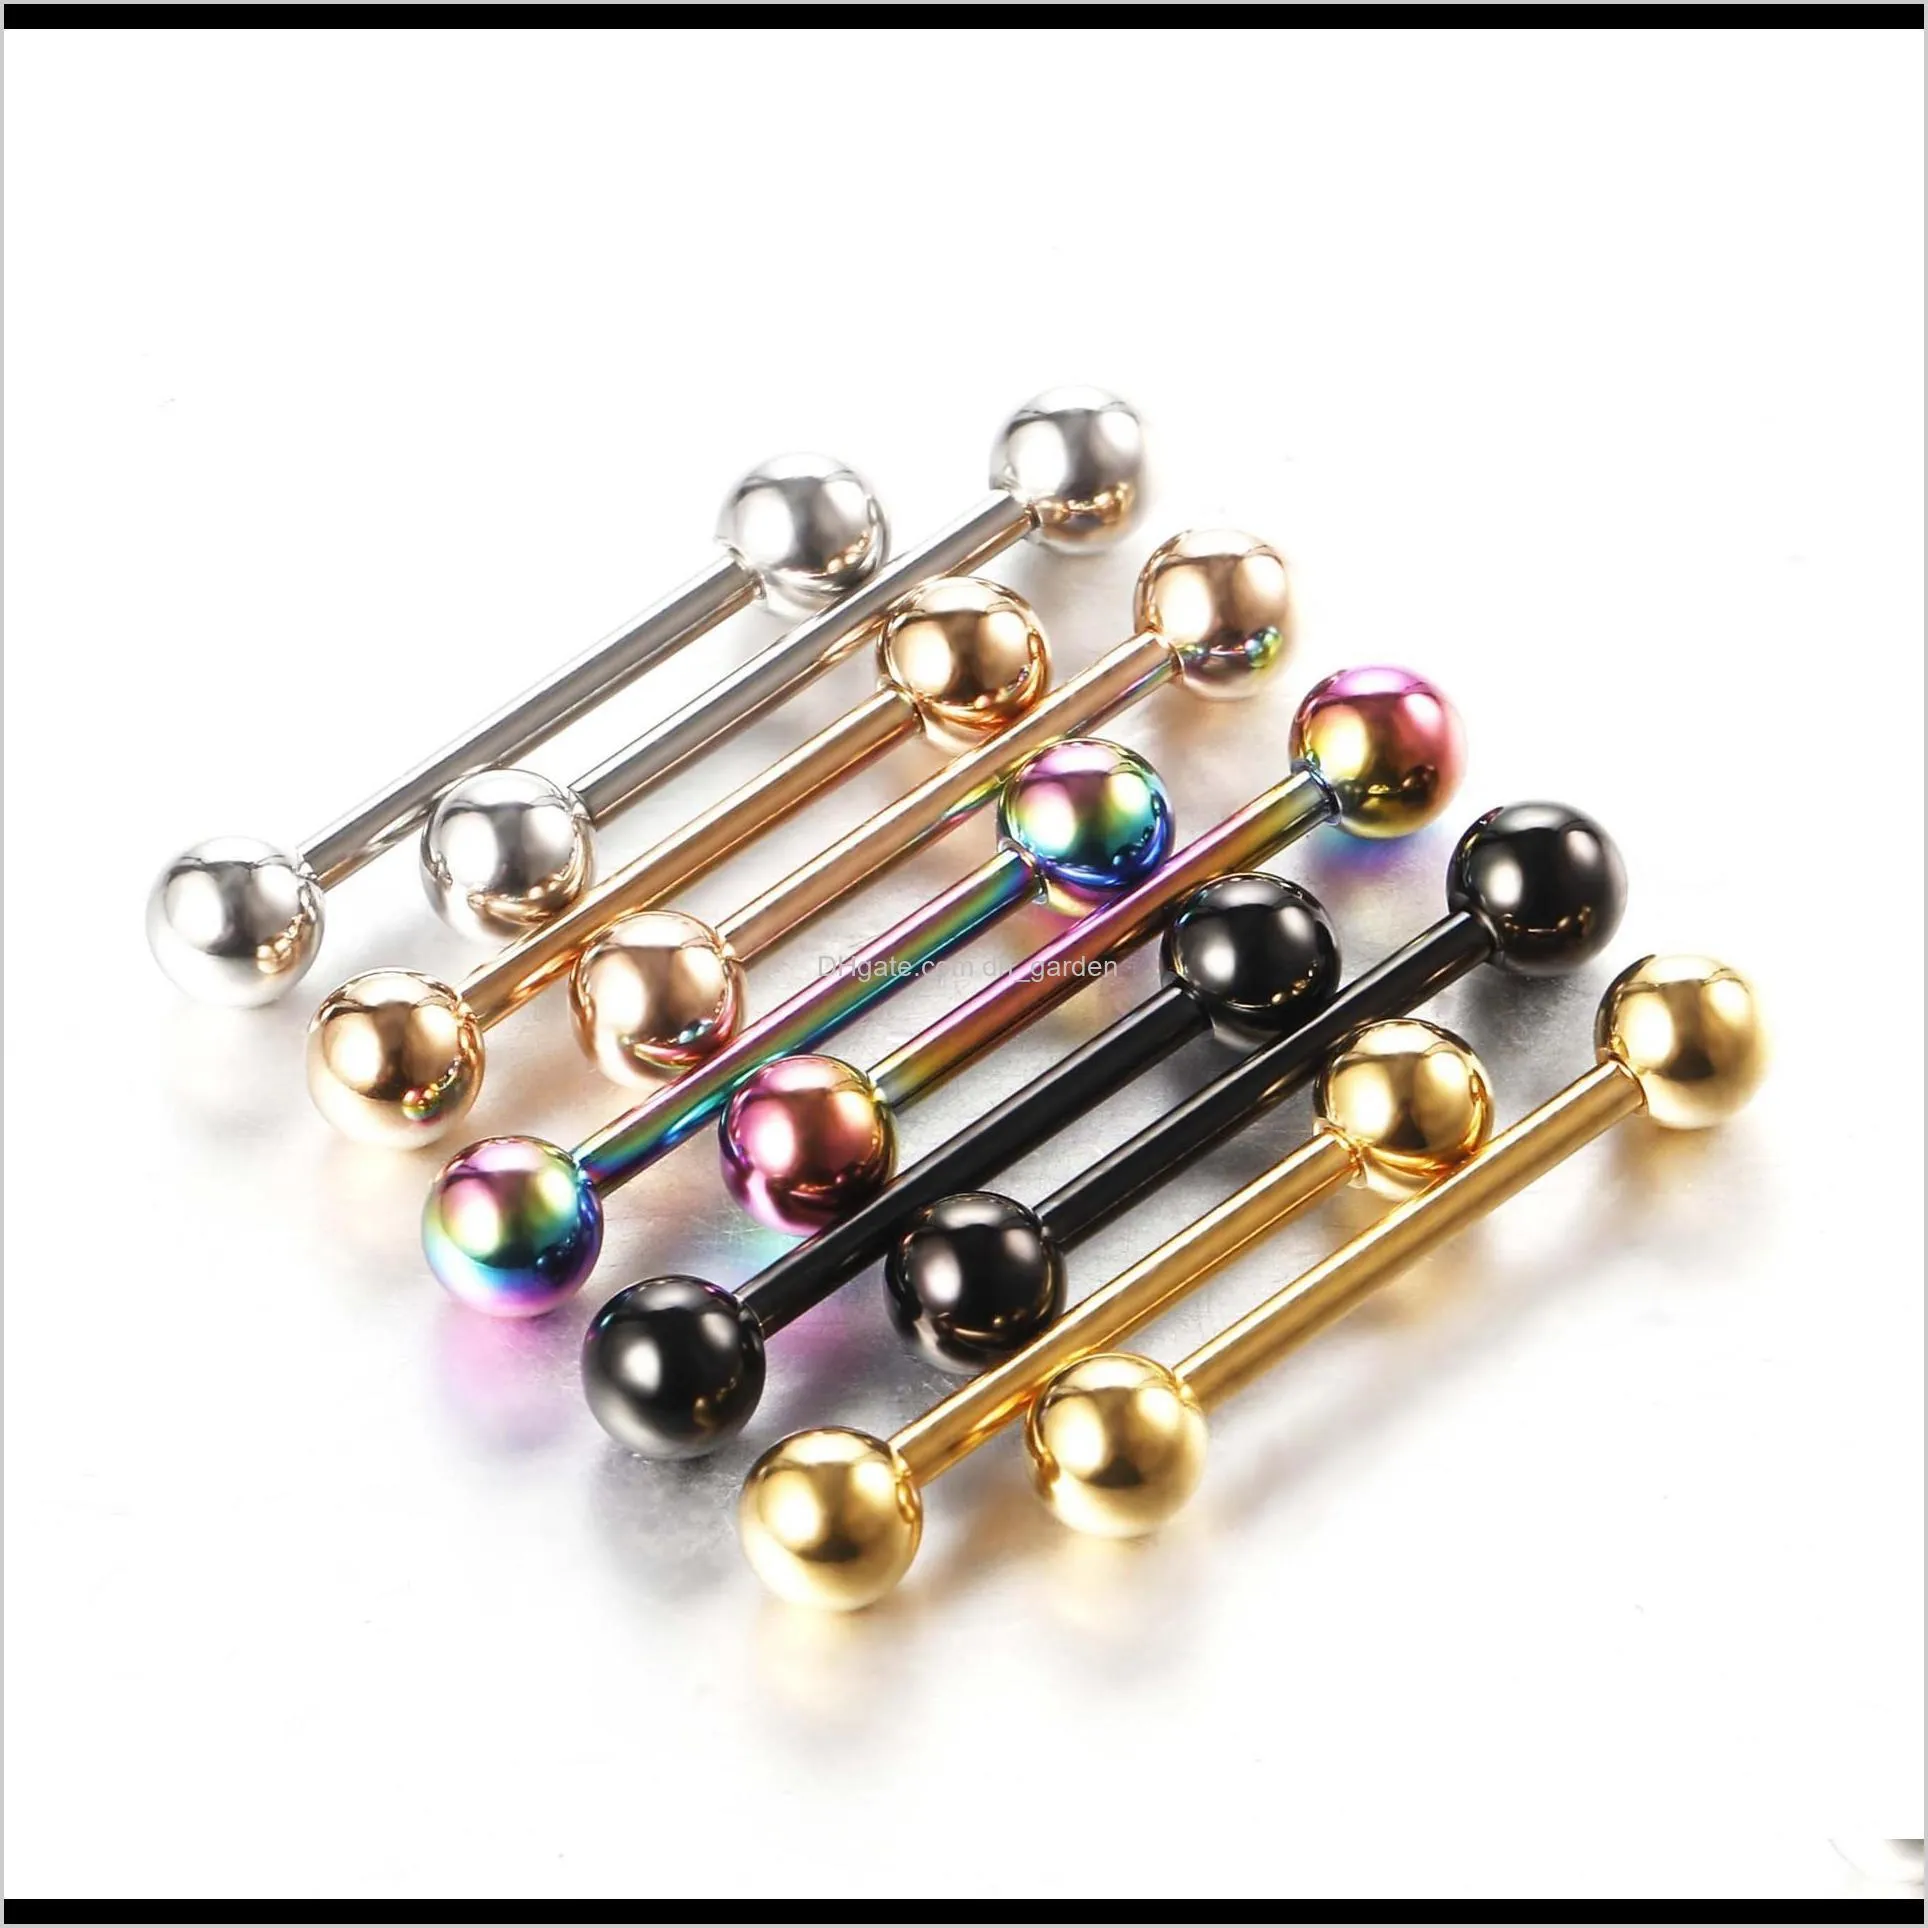 10pcs/set colorful stainless steel steel industrial barbell ring tongue nipple bar tragus helix ear piercing body fashion sexy jewelry